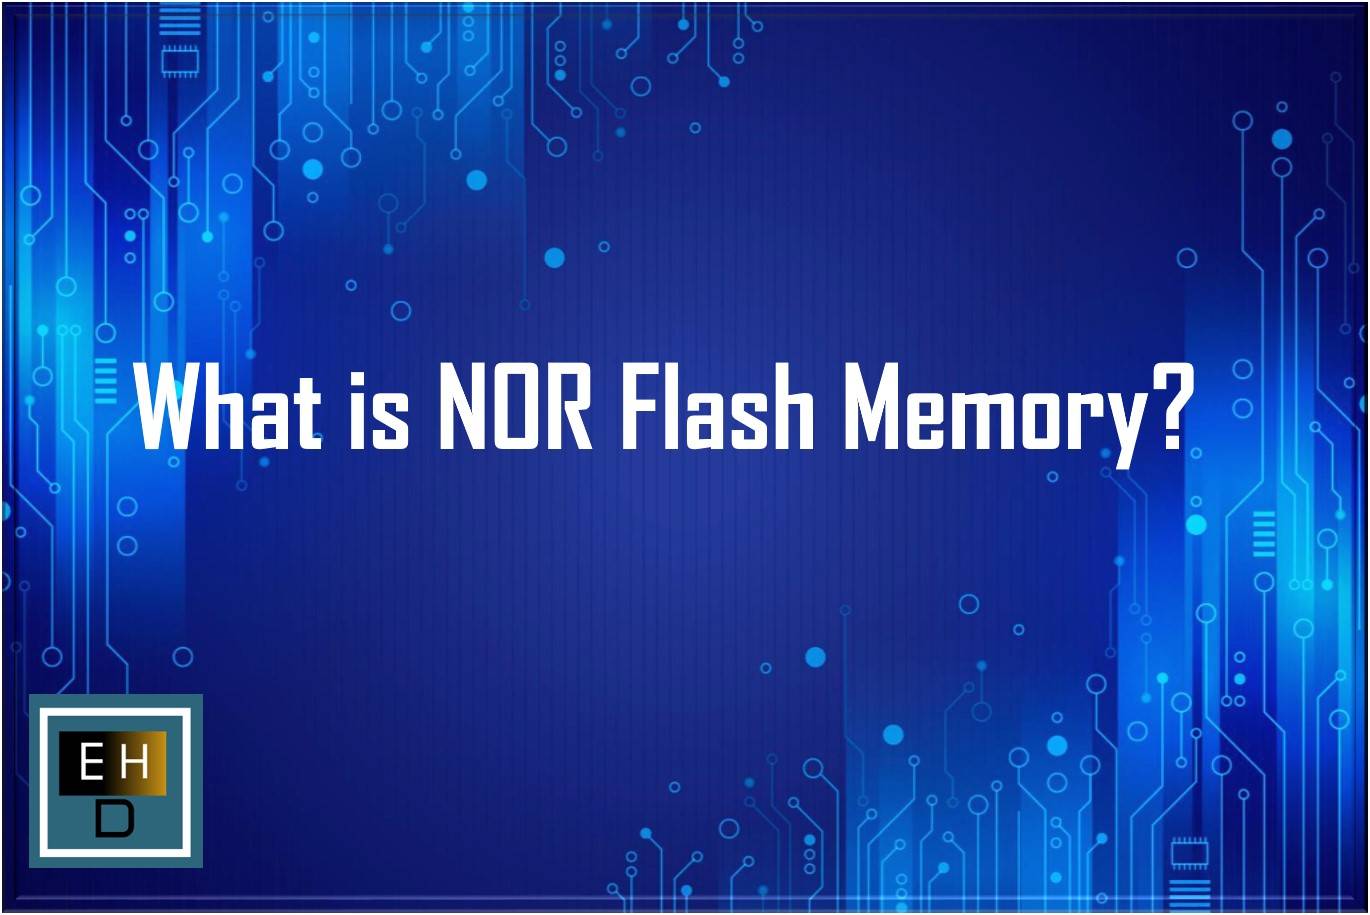 What is NOR Flash Memory